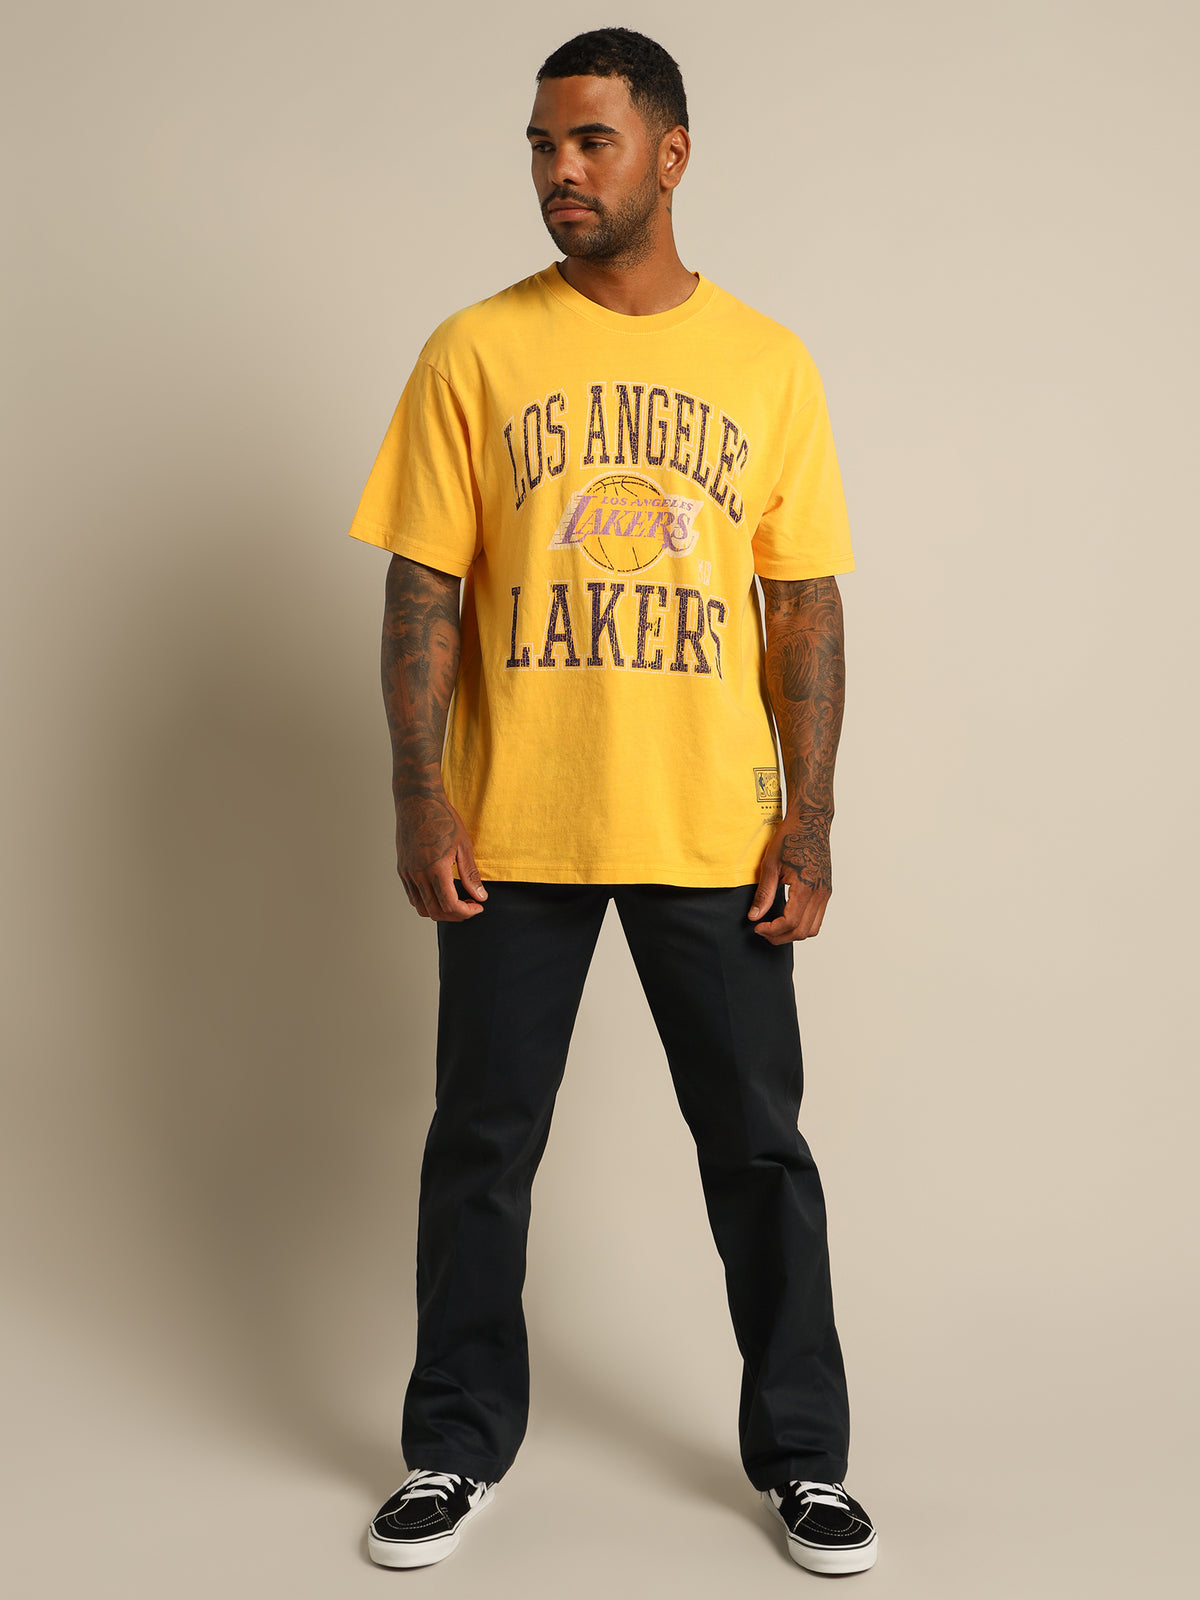 LA Lakers Vintage T-Shirt in Yellow